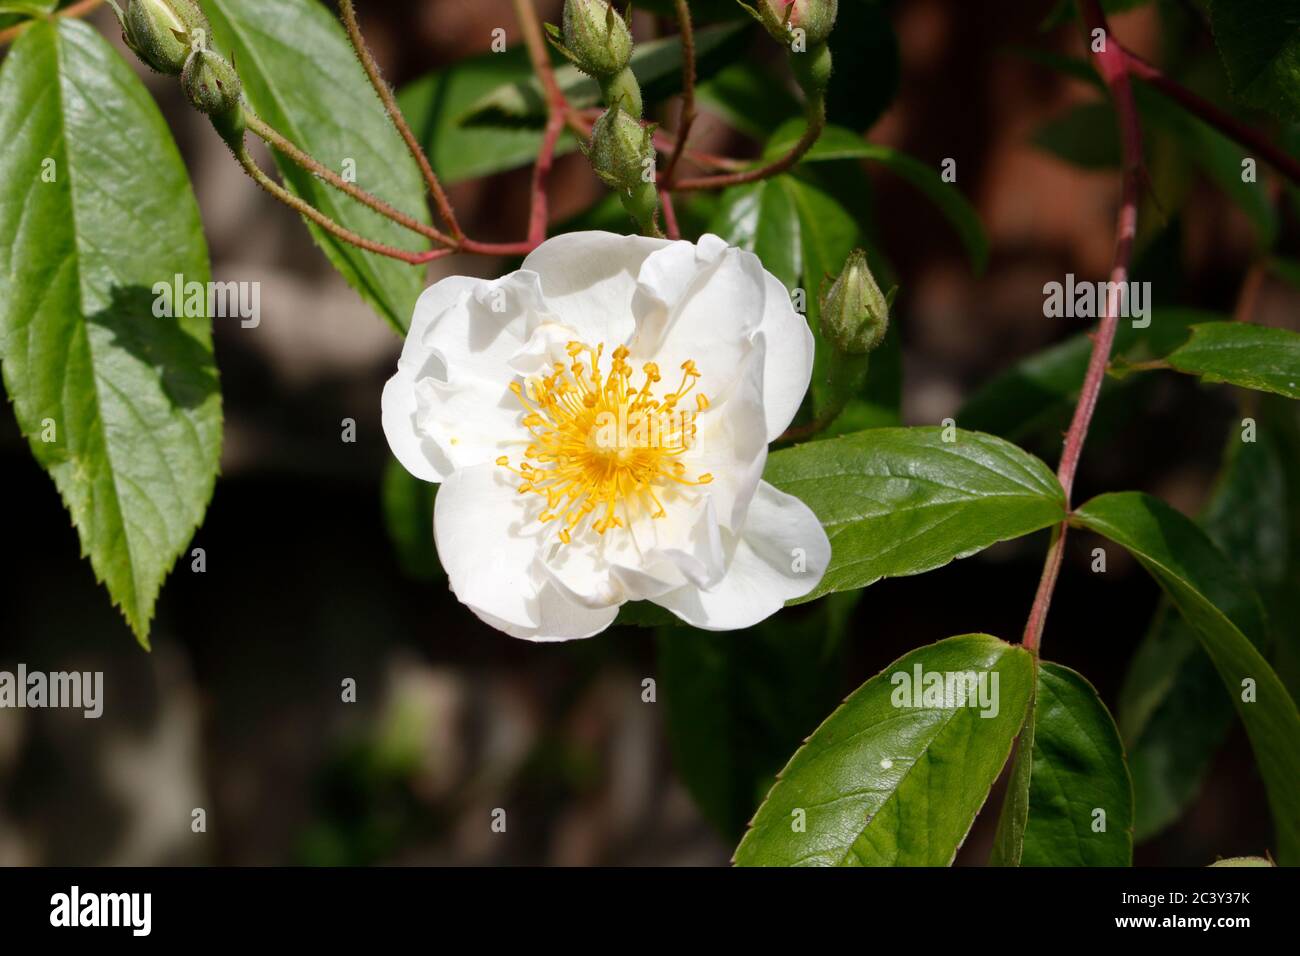 Brilliant white flower with yellow stamens Stock Photo